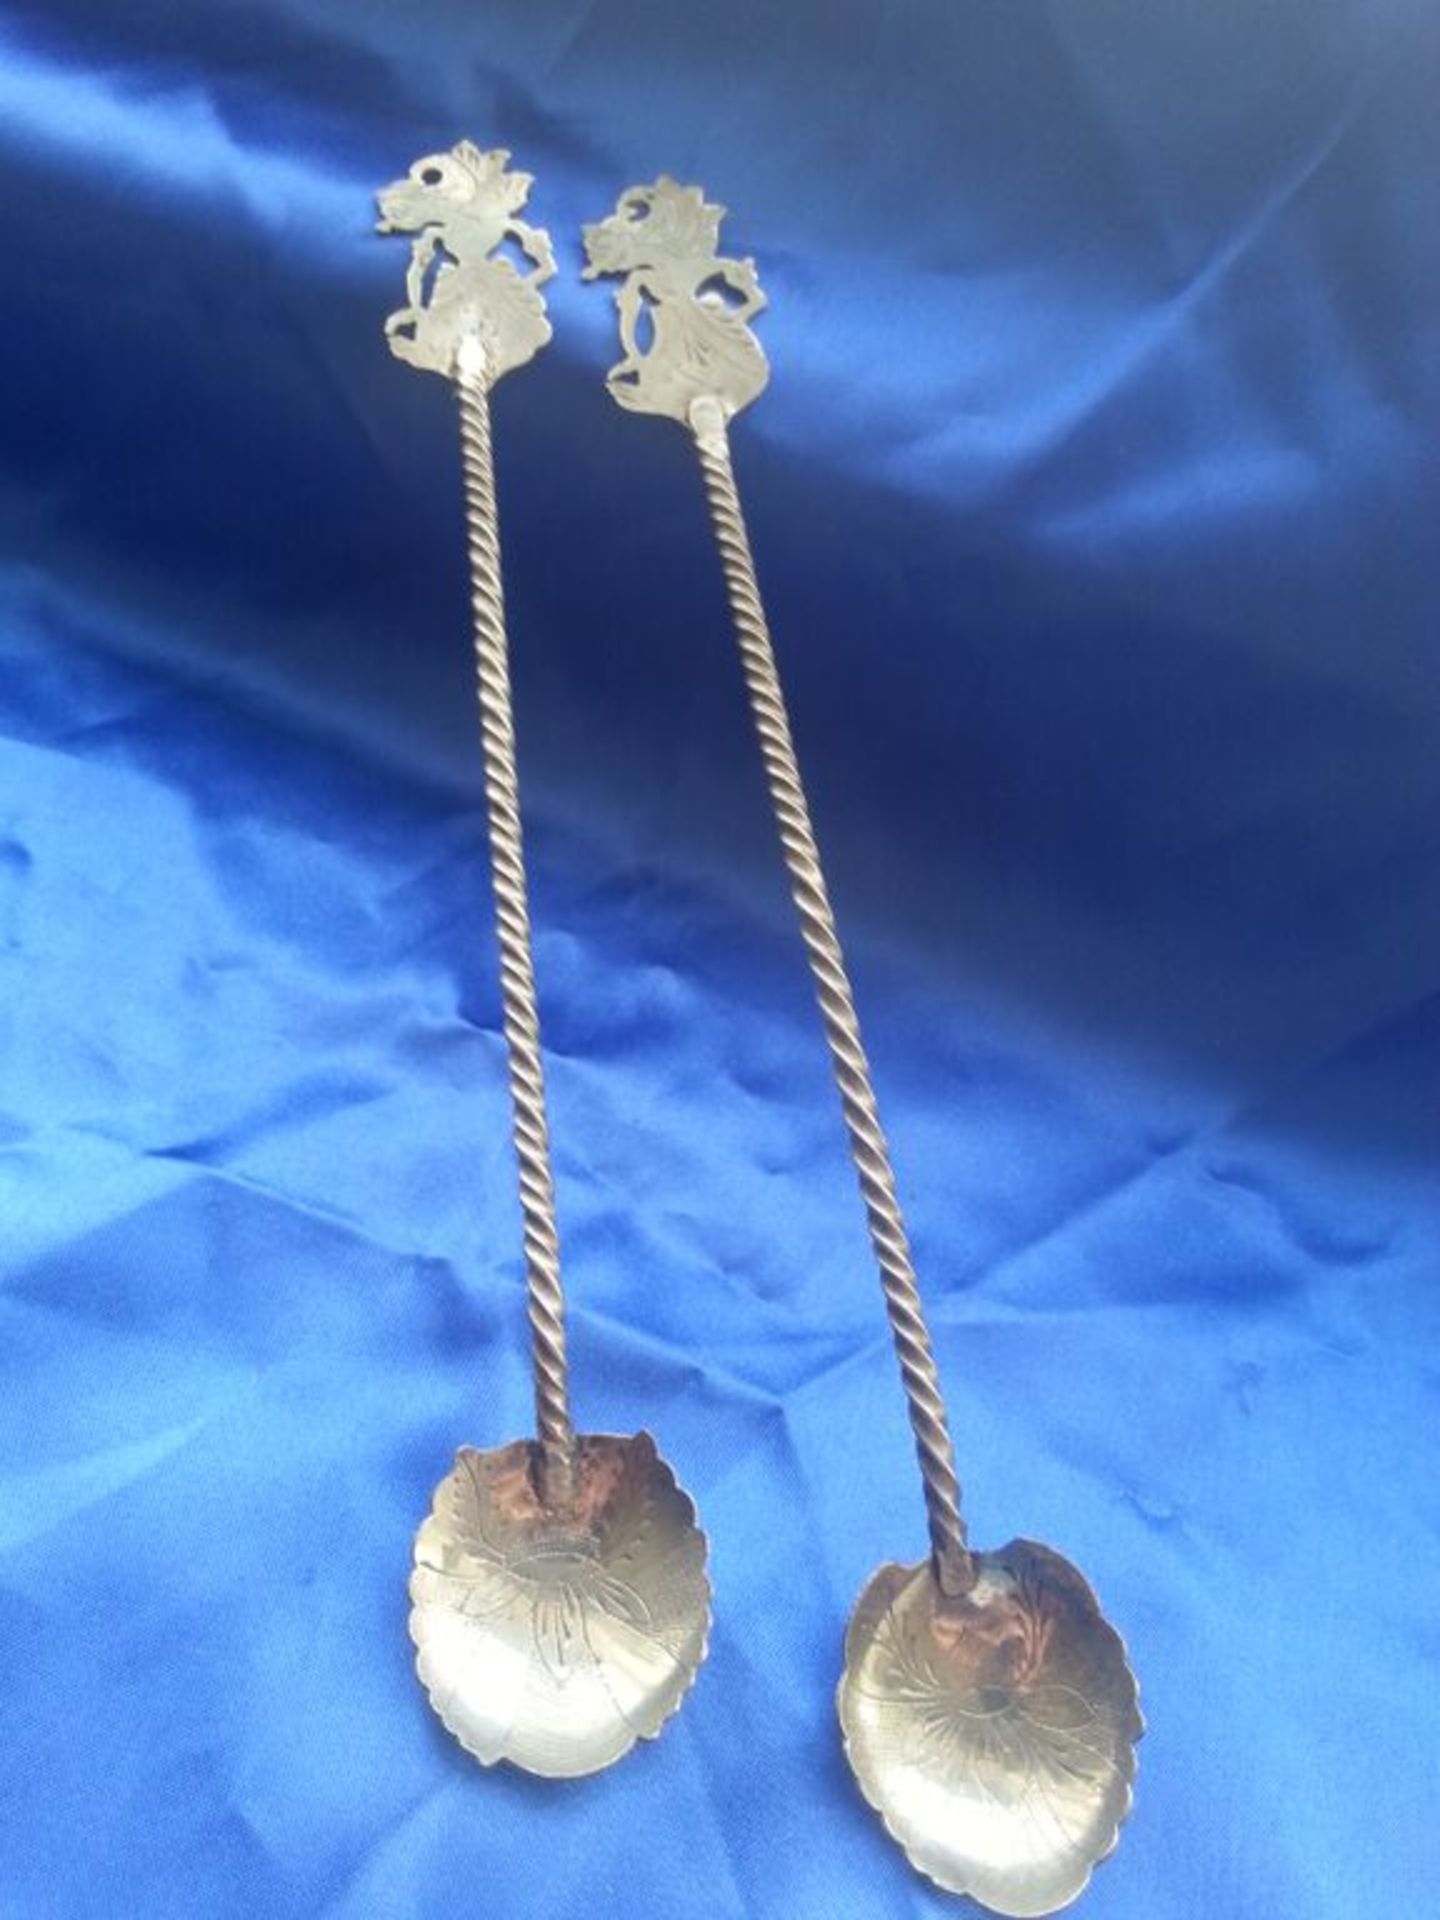 Vintage Unique Long Handled Spoons Measuring 6.5 inches. Barley Twist handles with a Fairy atop each